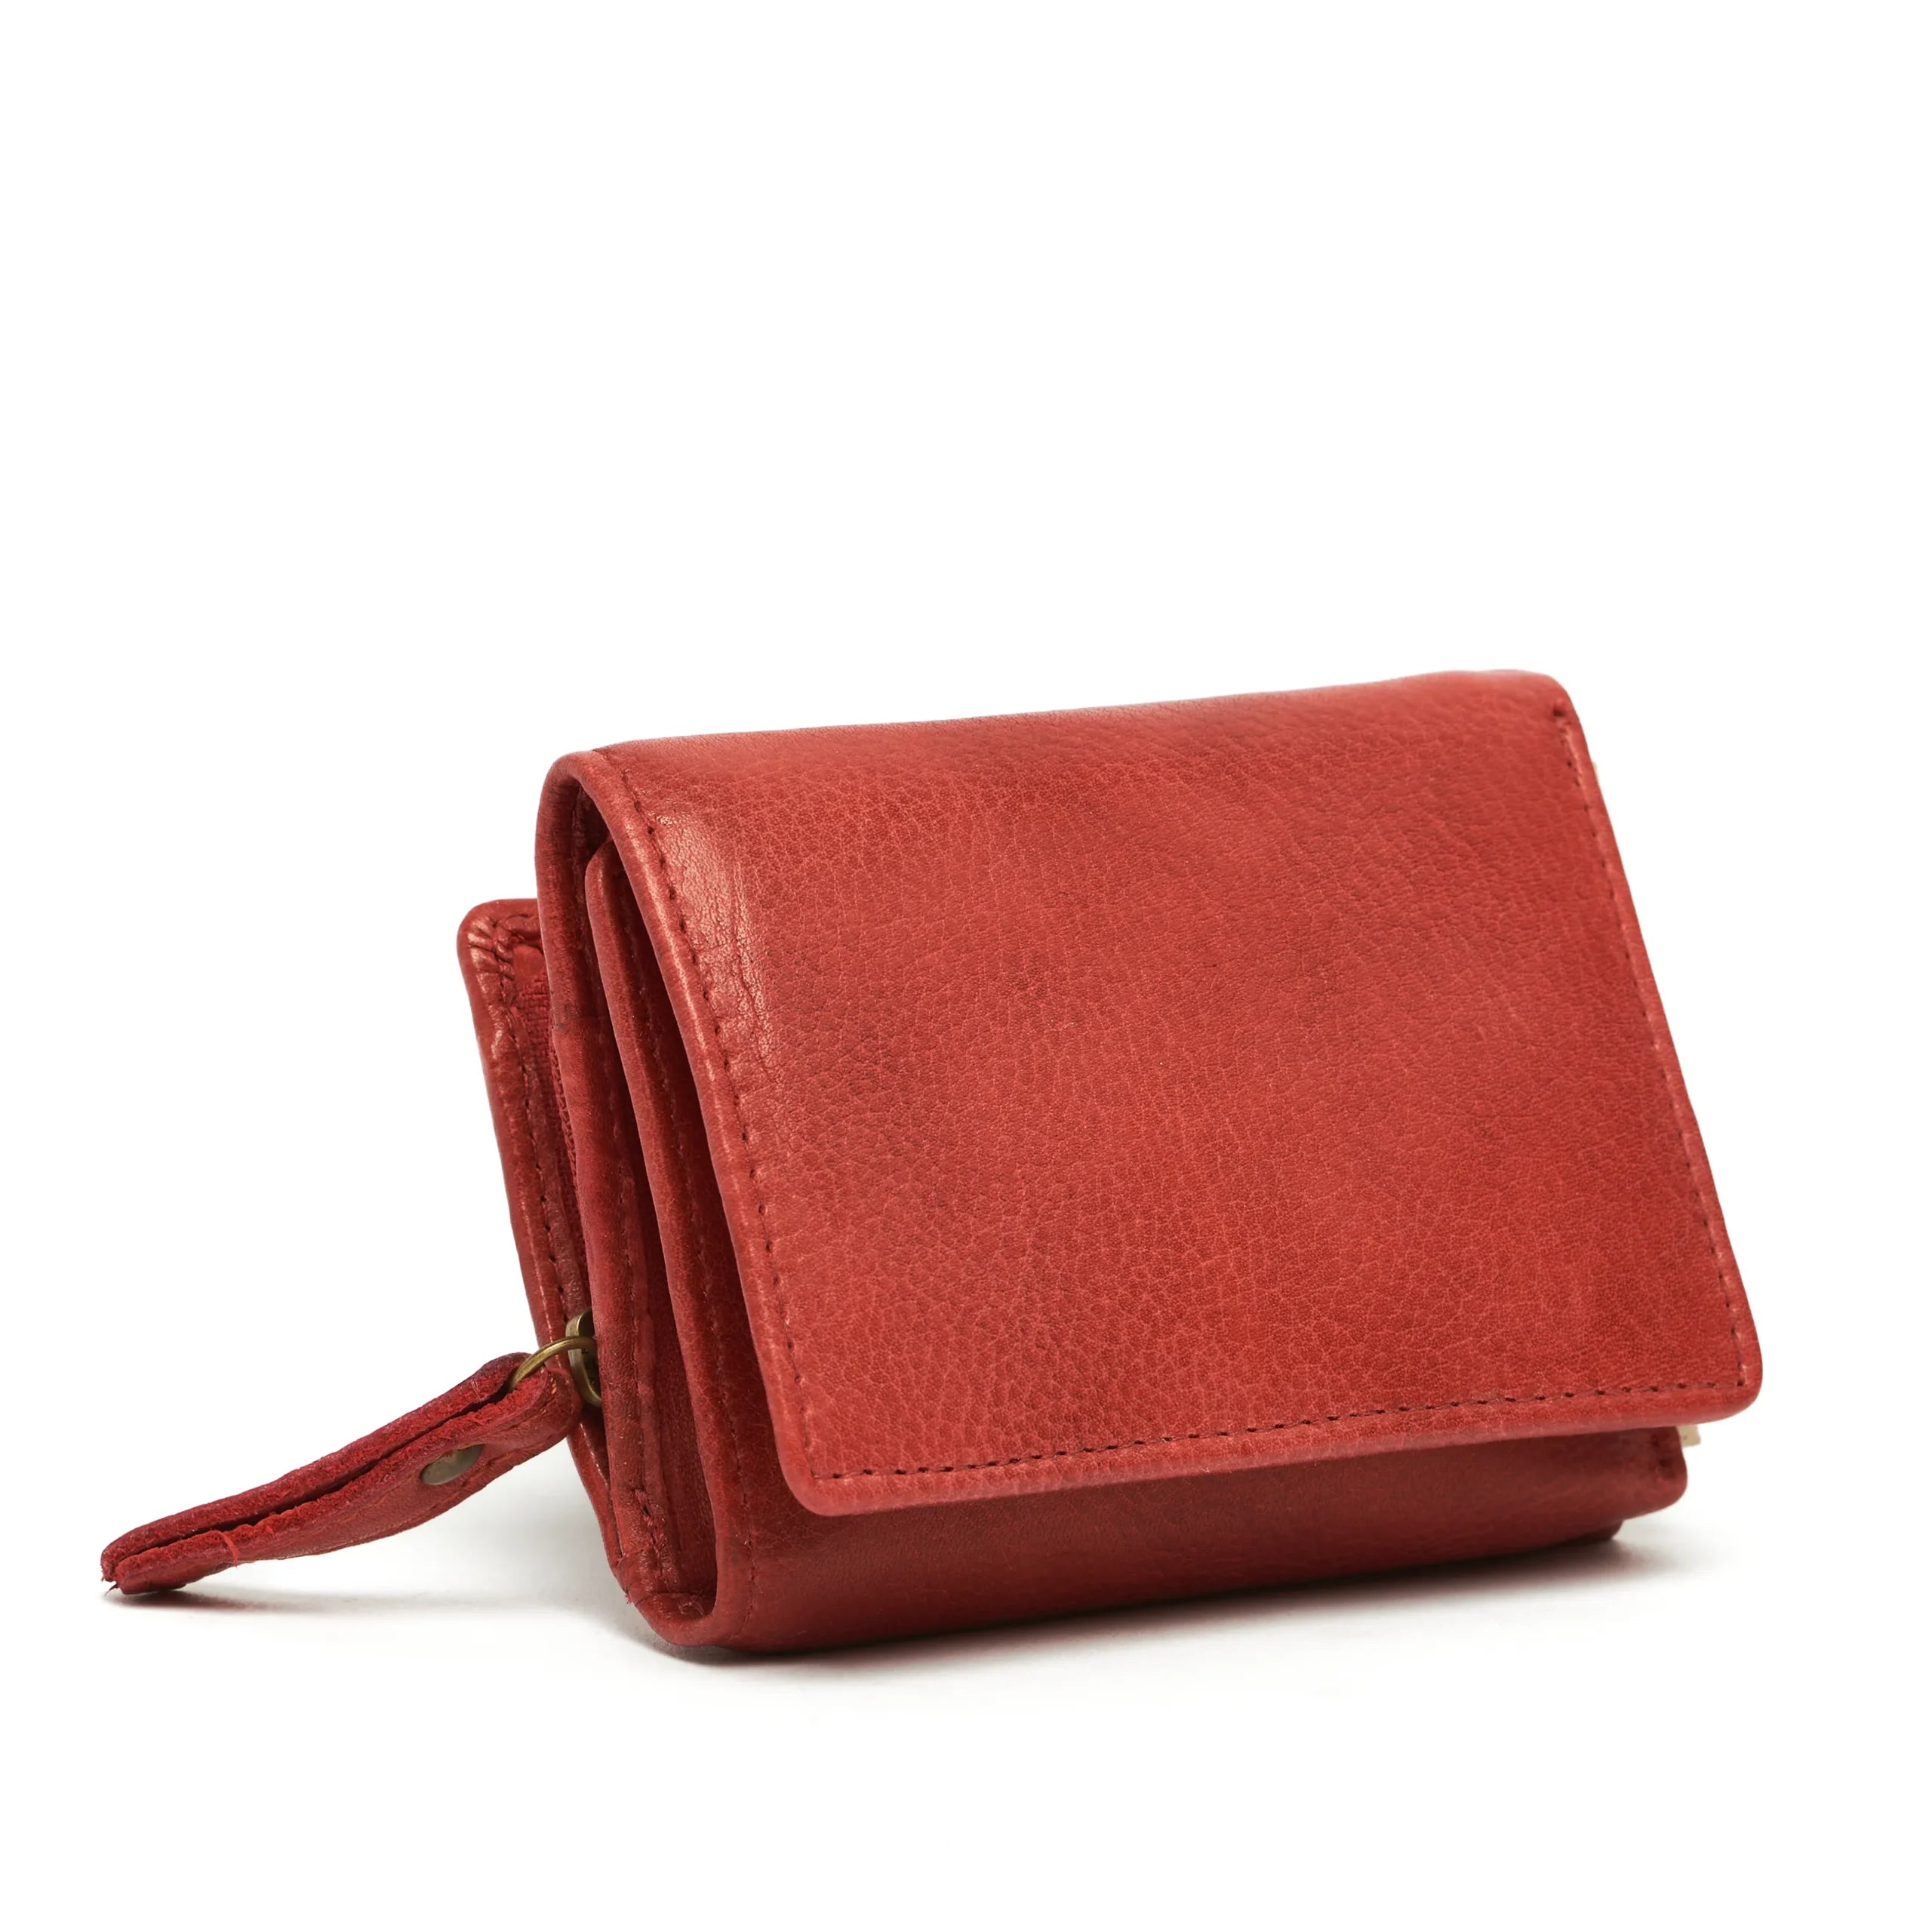 Oran - RH485 Vikky Small RFID leather wallet w Coin section - Red-1